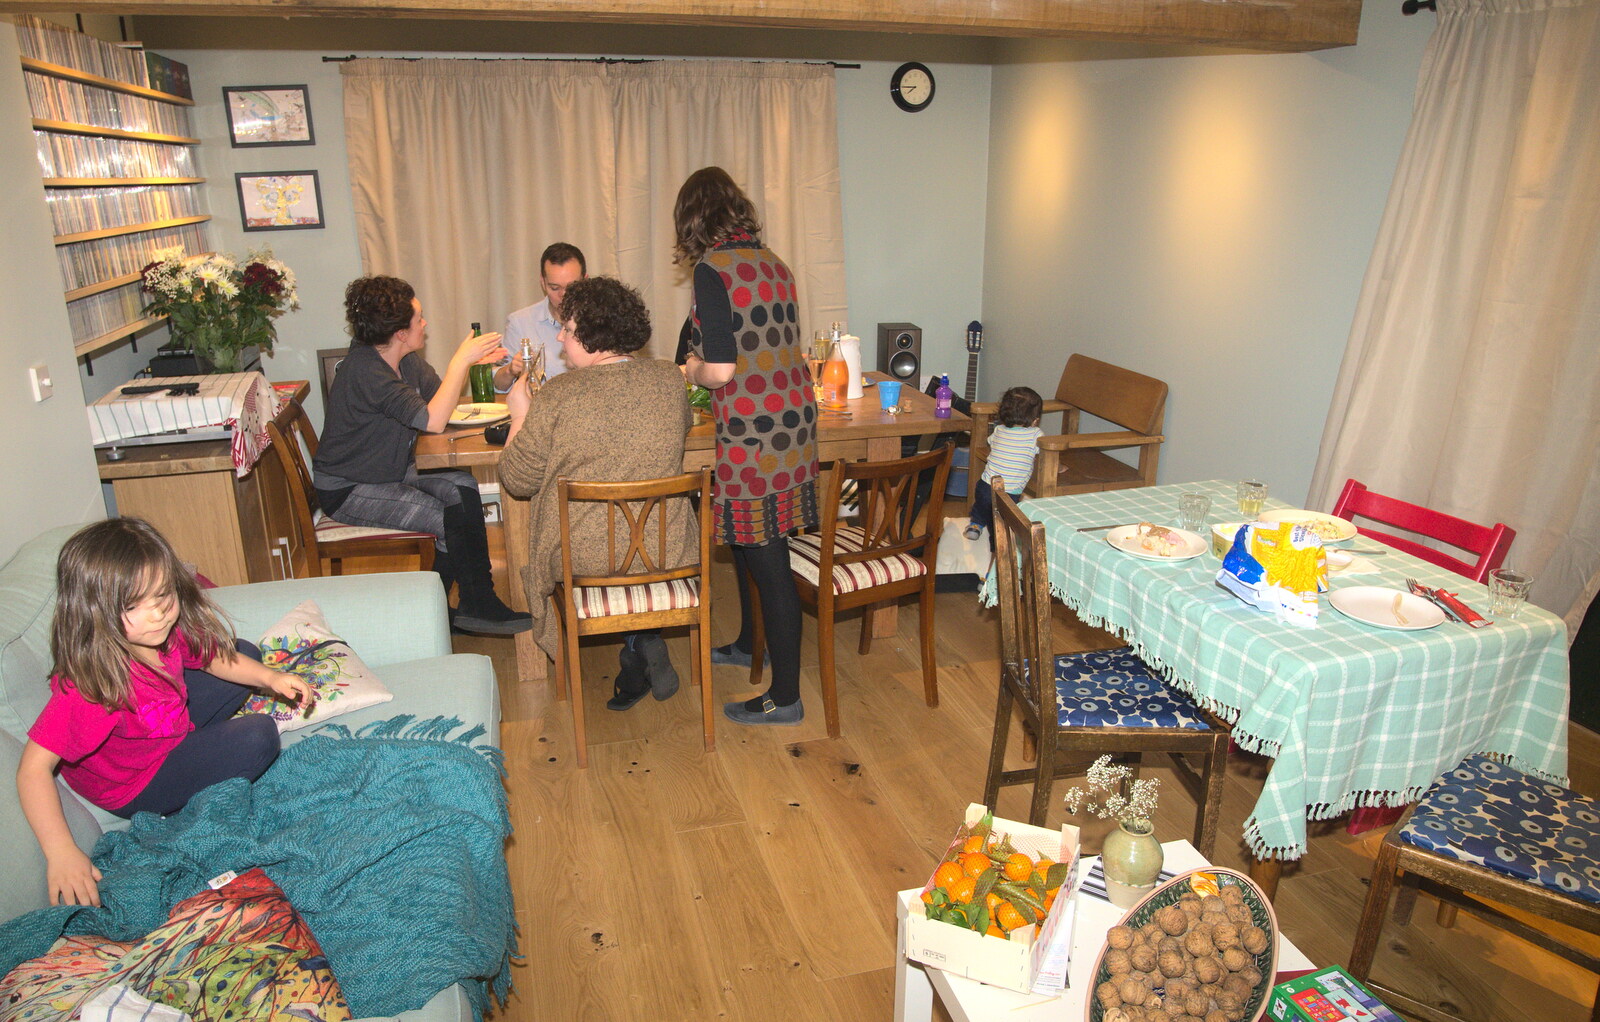 Dinner in the dining room from Christmas and All That, Brome, Suffolk - 25th December 2016